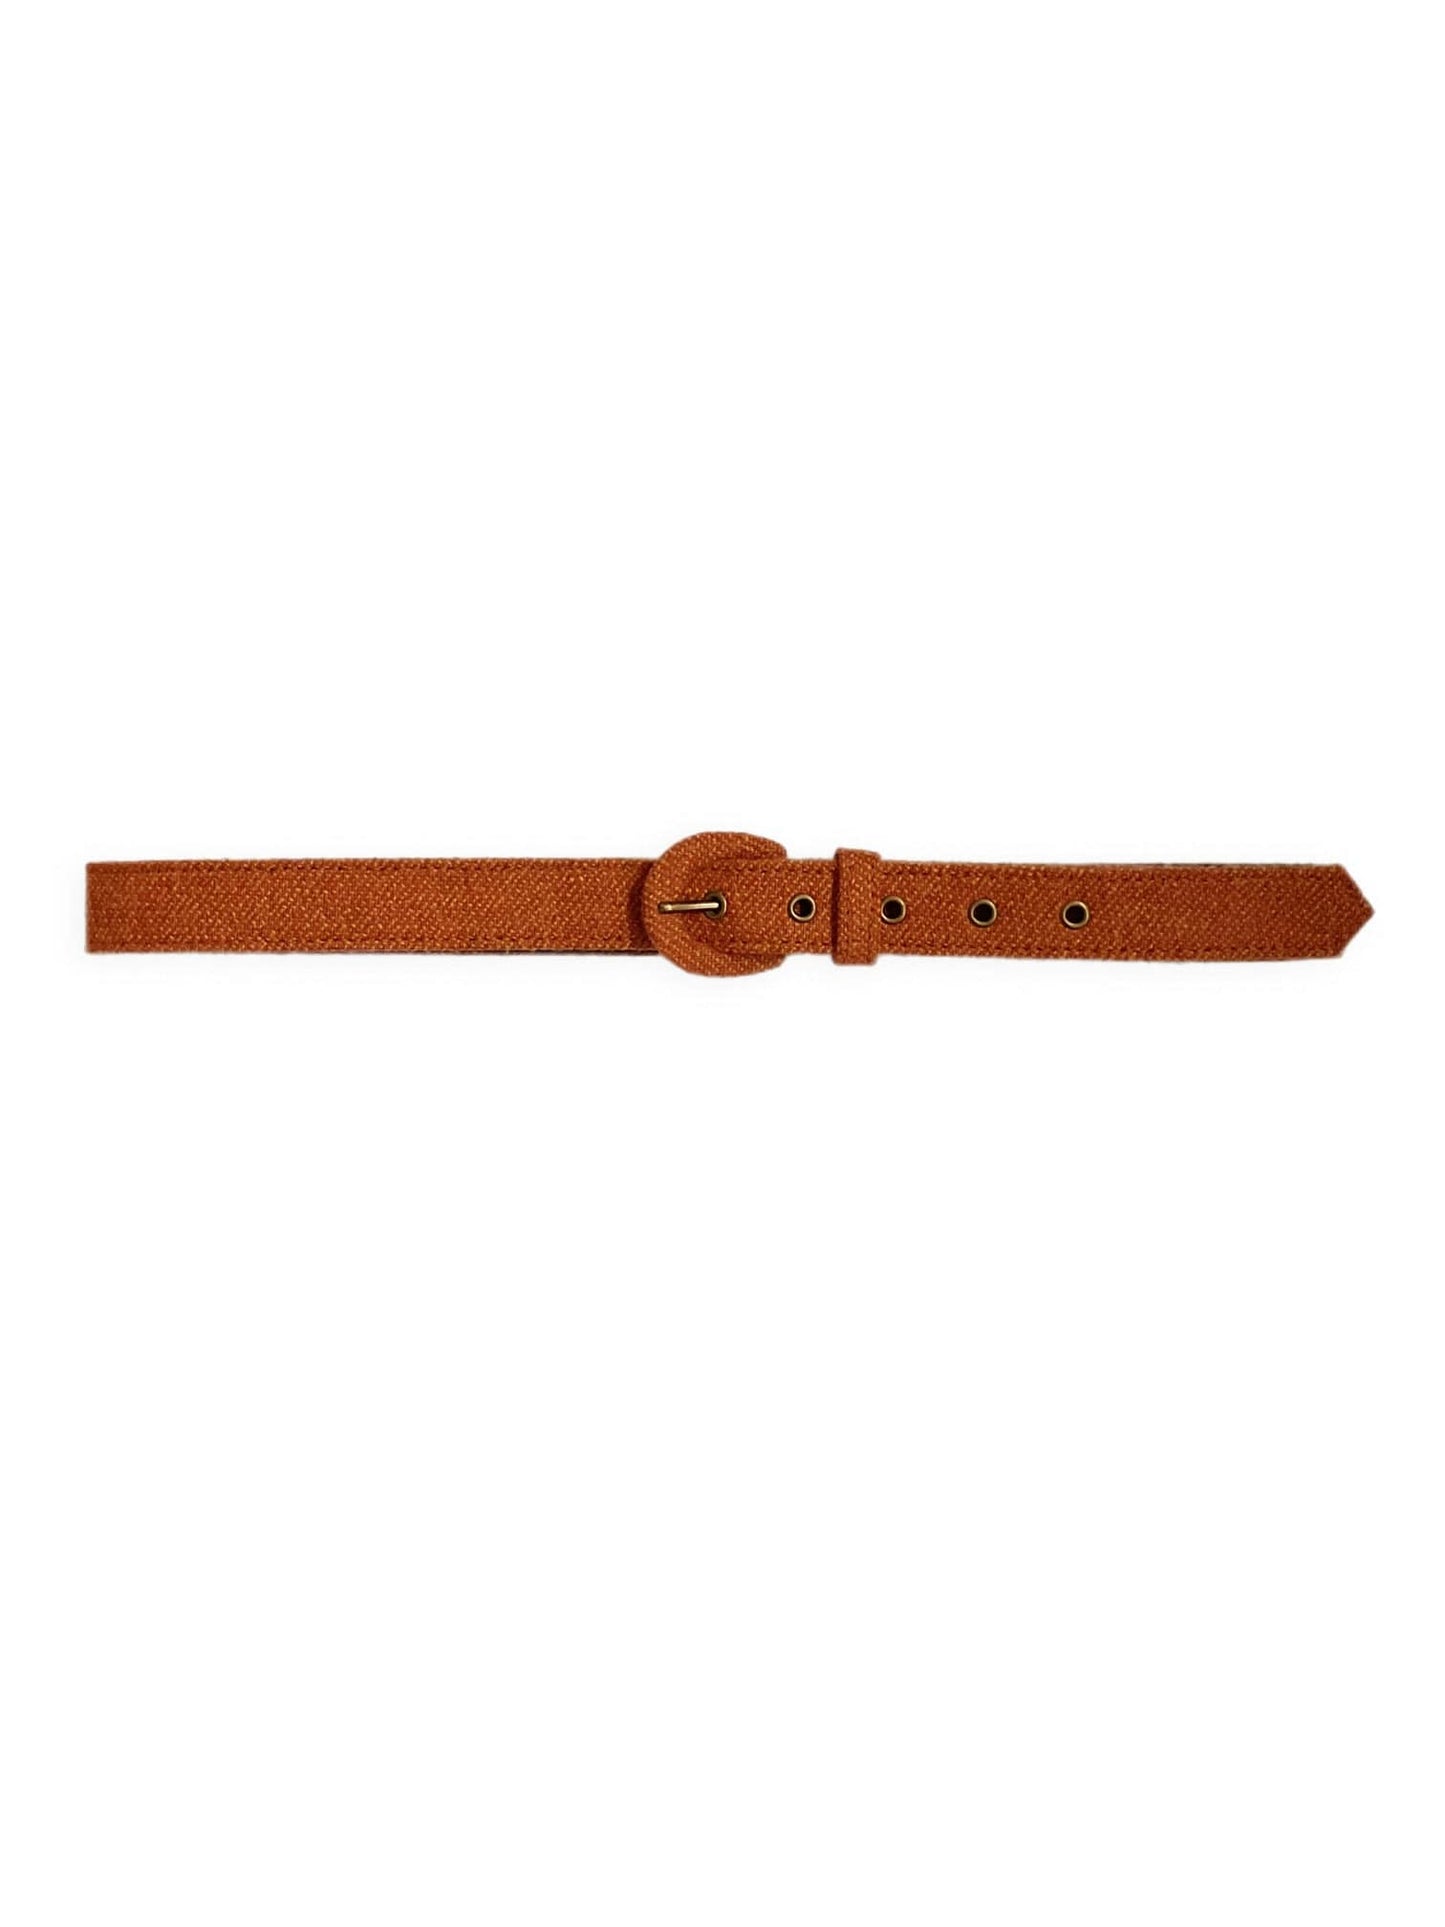 Narrow Belt for Nature vs Nurture Collection Belts CHRISTINE ALCALAY Marmalade (Wool) Extra Small 